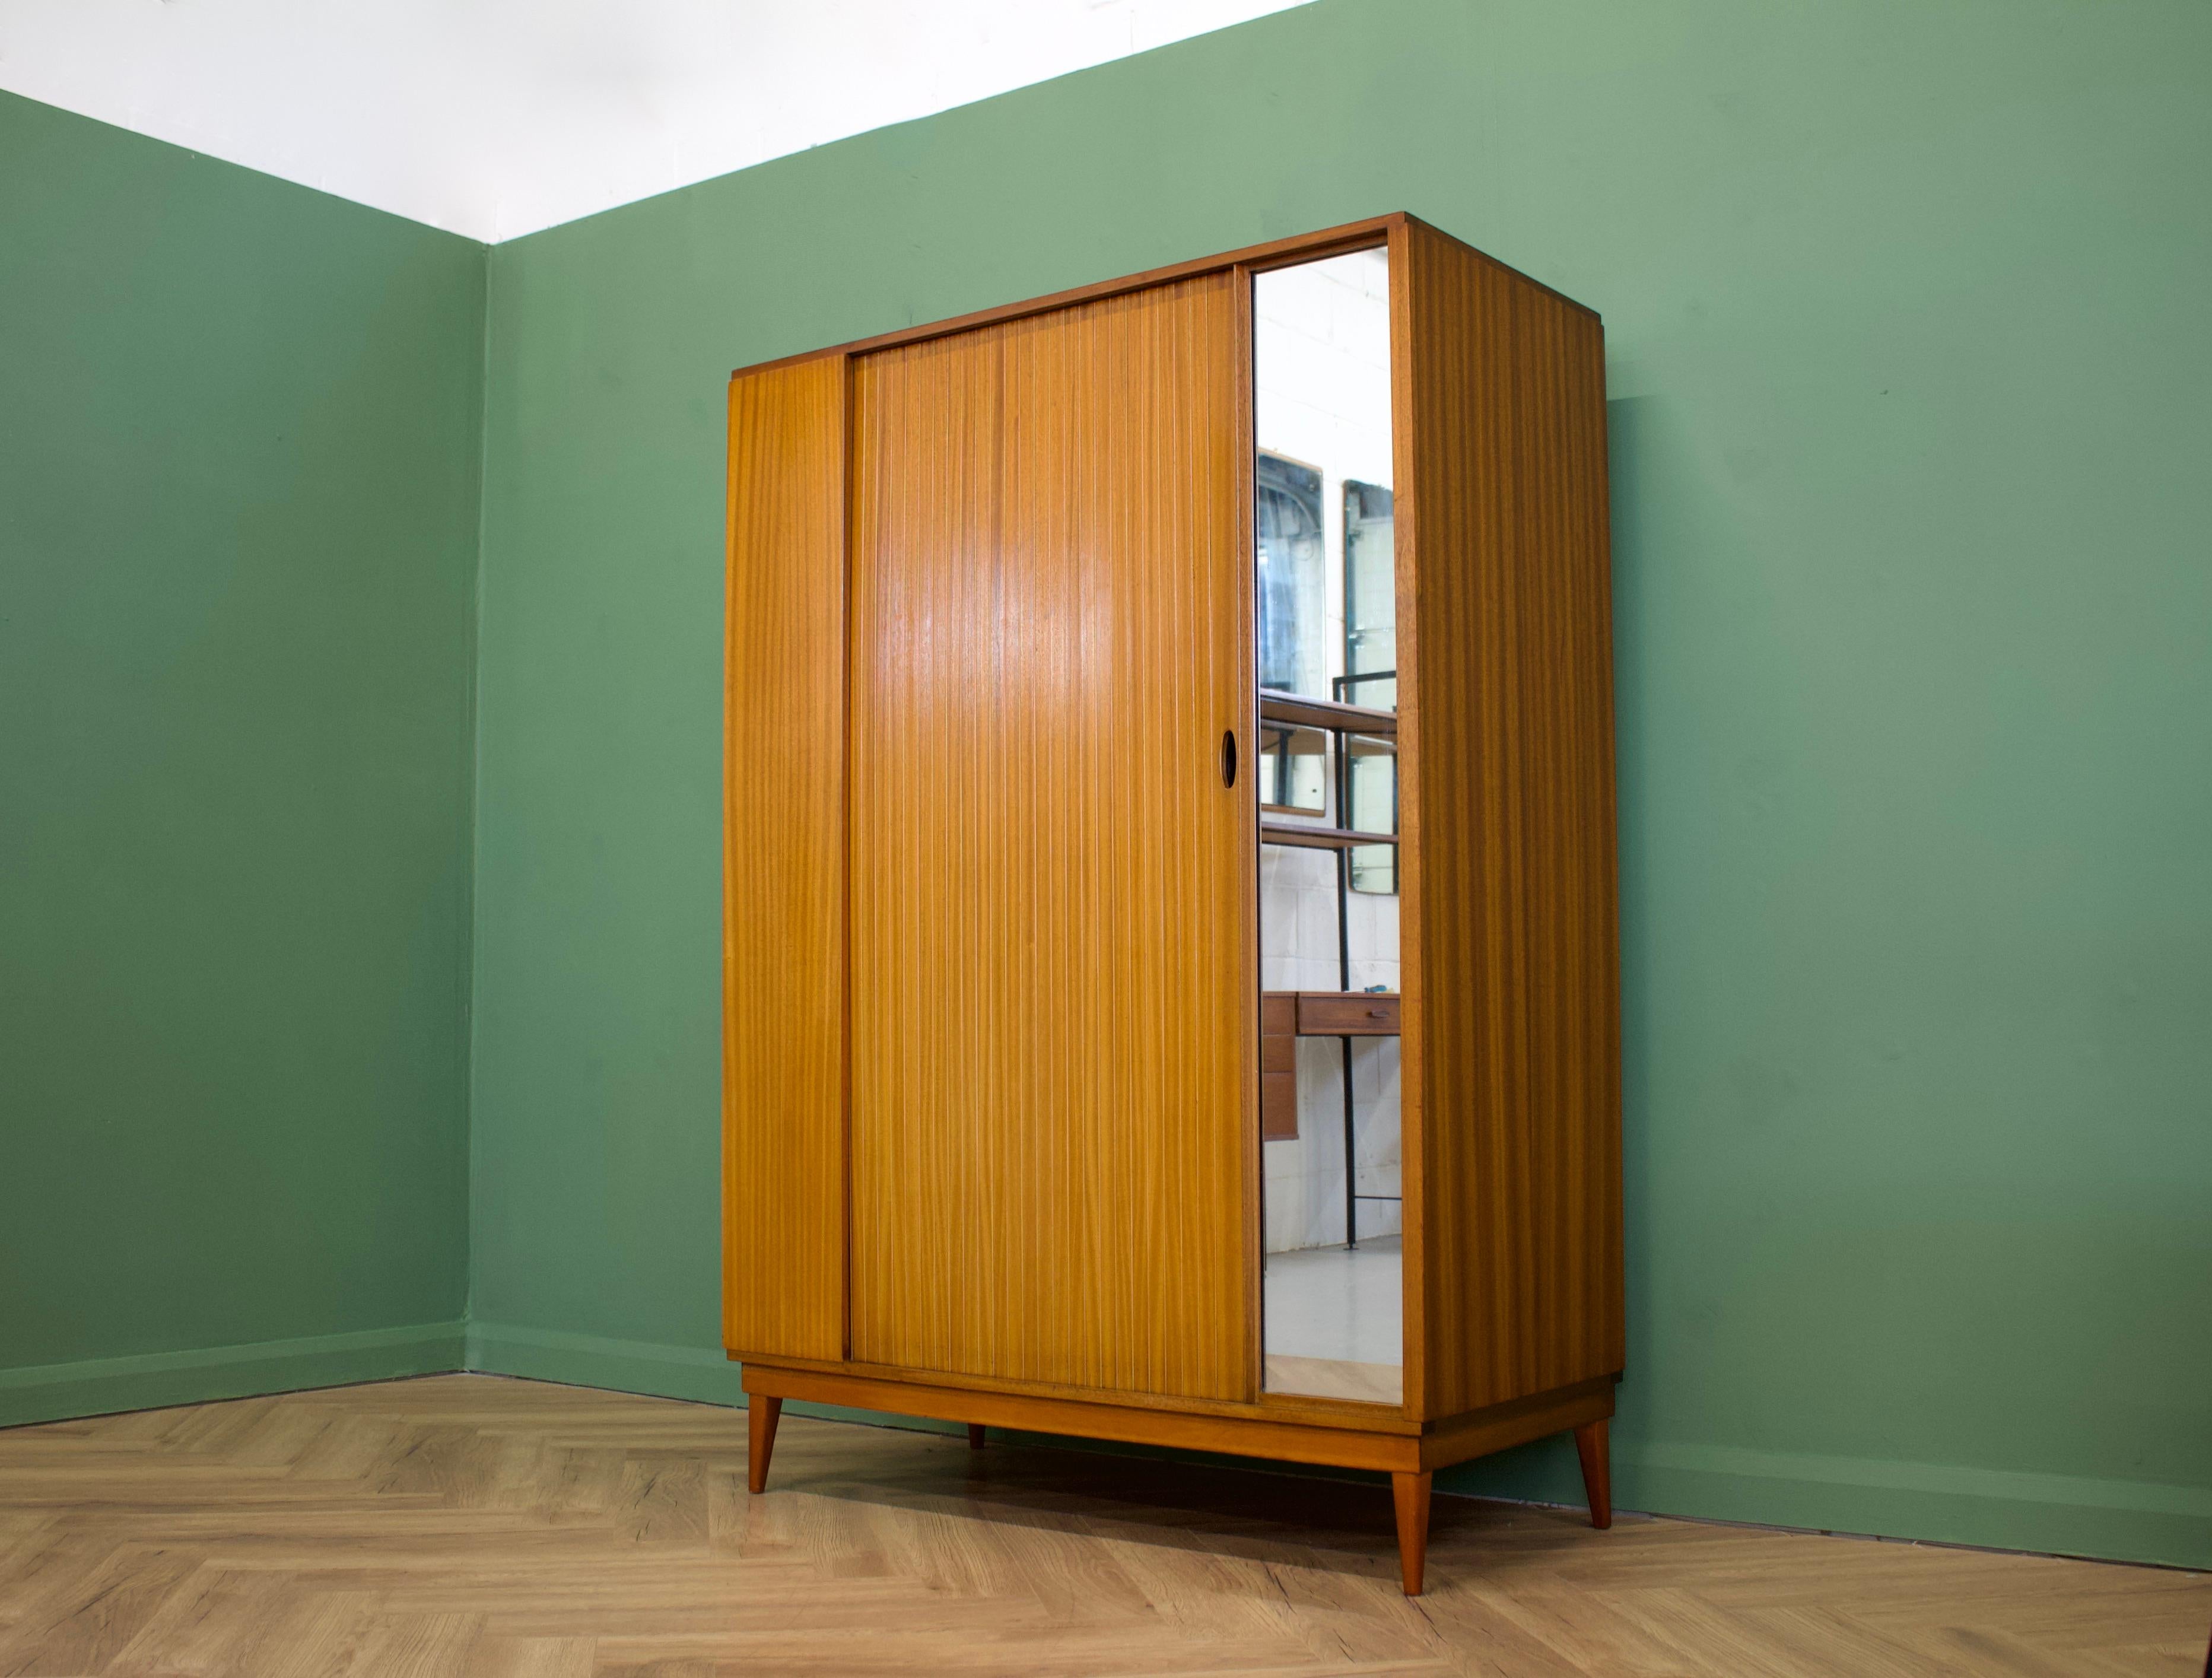 - Mid-Century Modern wardrobe.
- Manufactured by Austinsuite in the UK.
- Made from teak and teak veneer.
- Featuring a tambour door and a rail the full width.
- Also features a full length mirror to to the outside.